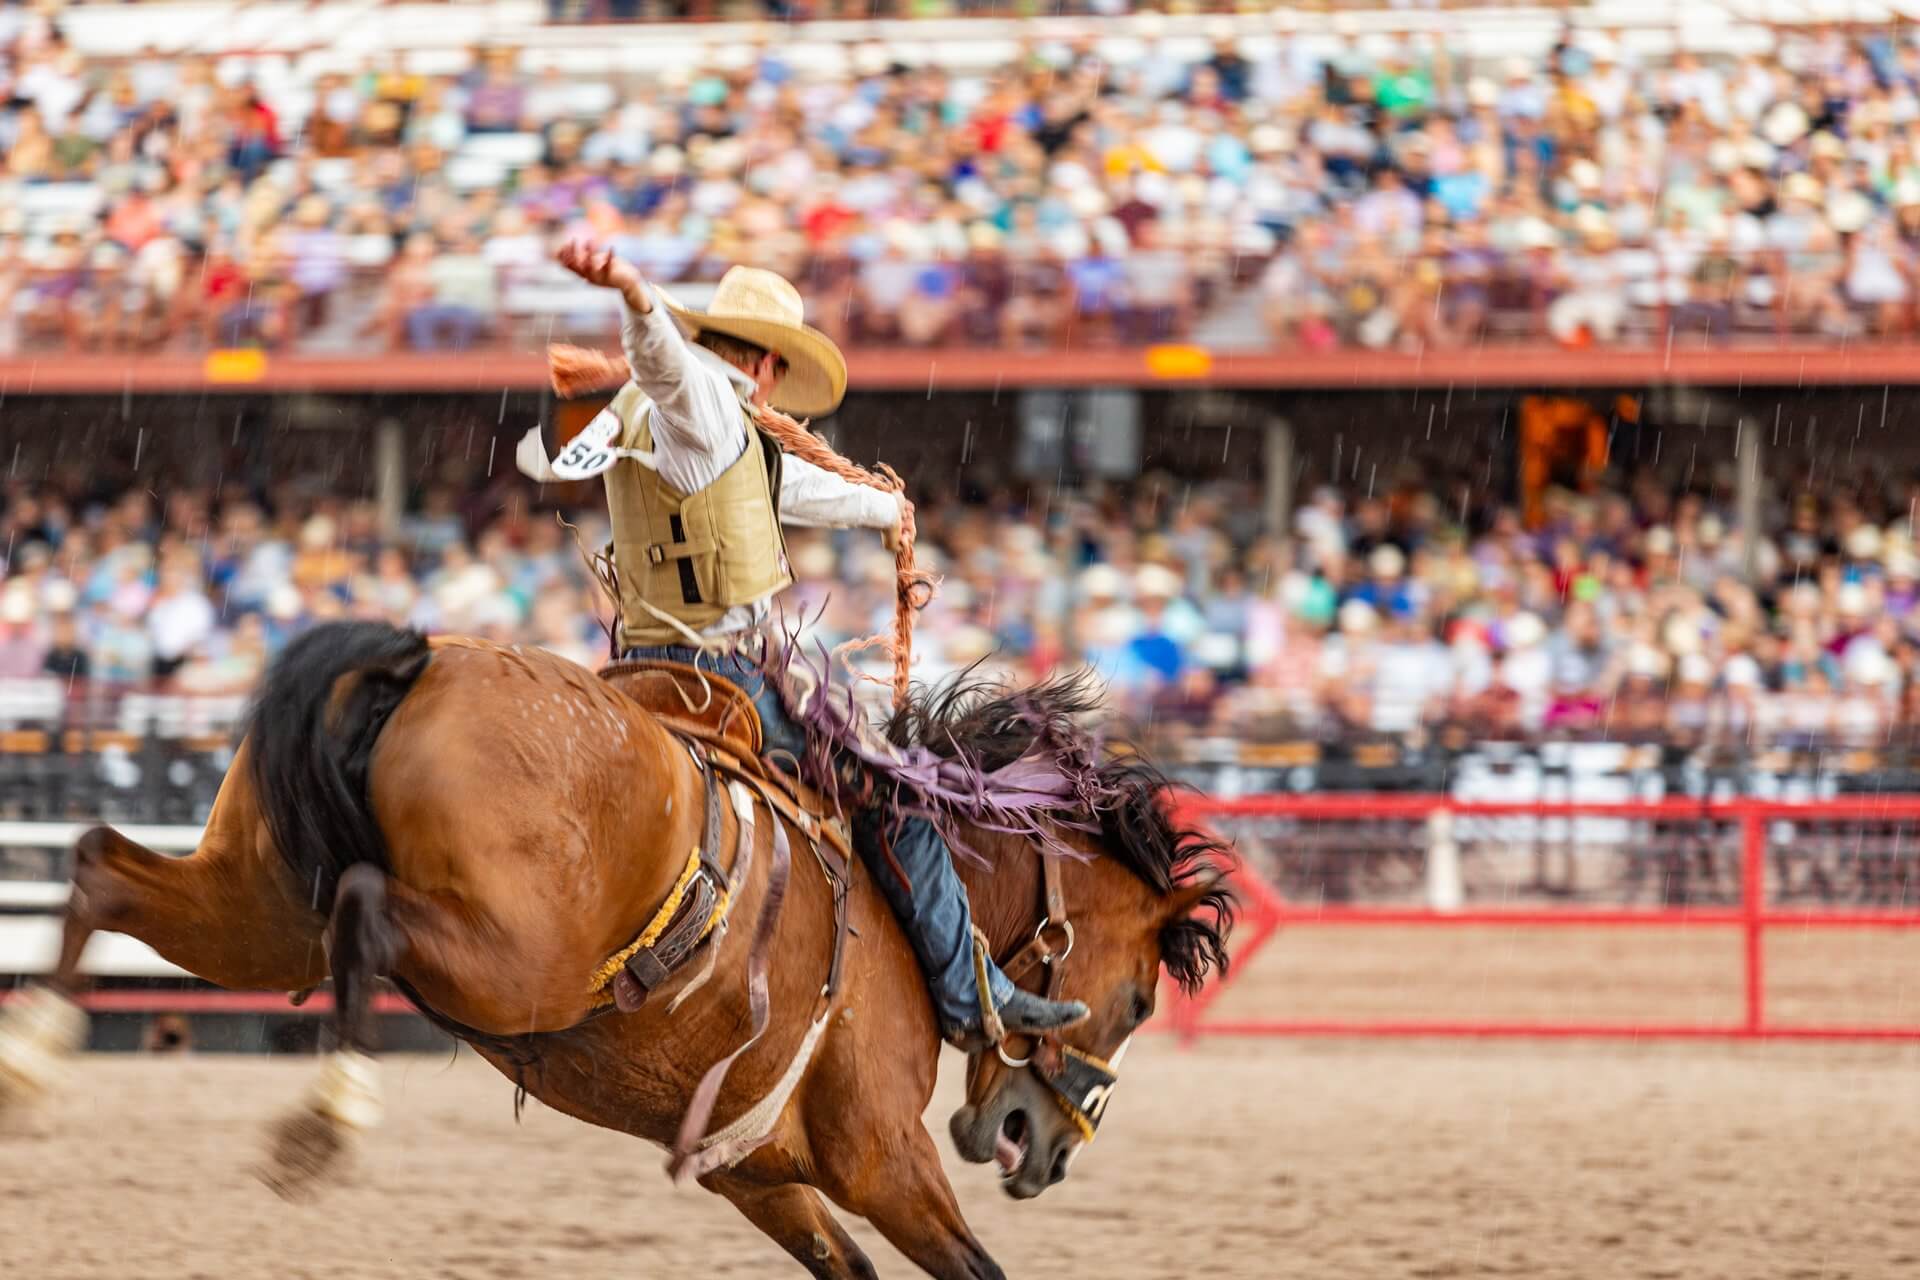 A man riding a bucking horse before a stadium filled with people at Cheyenne Frontier Days.